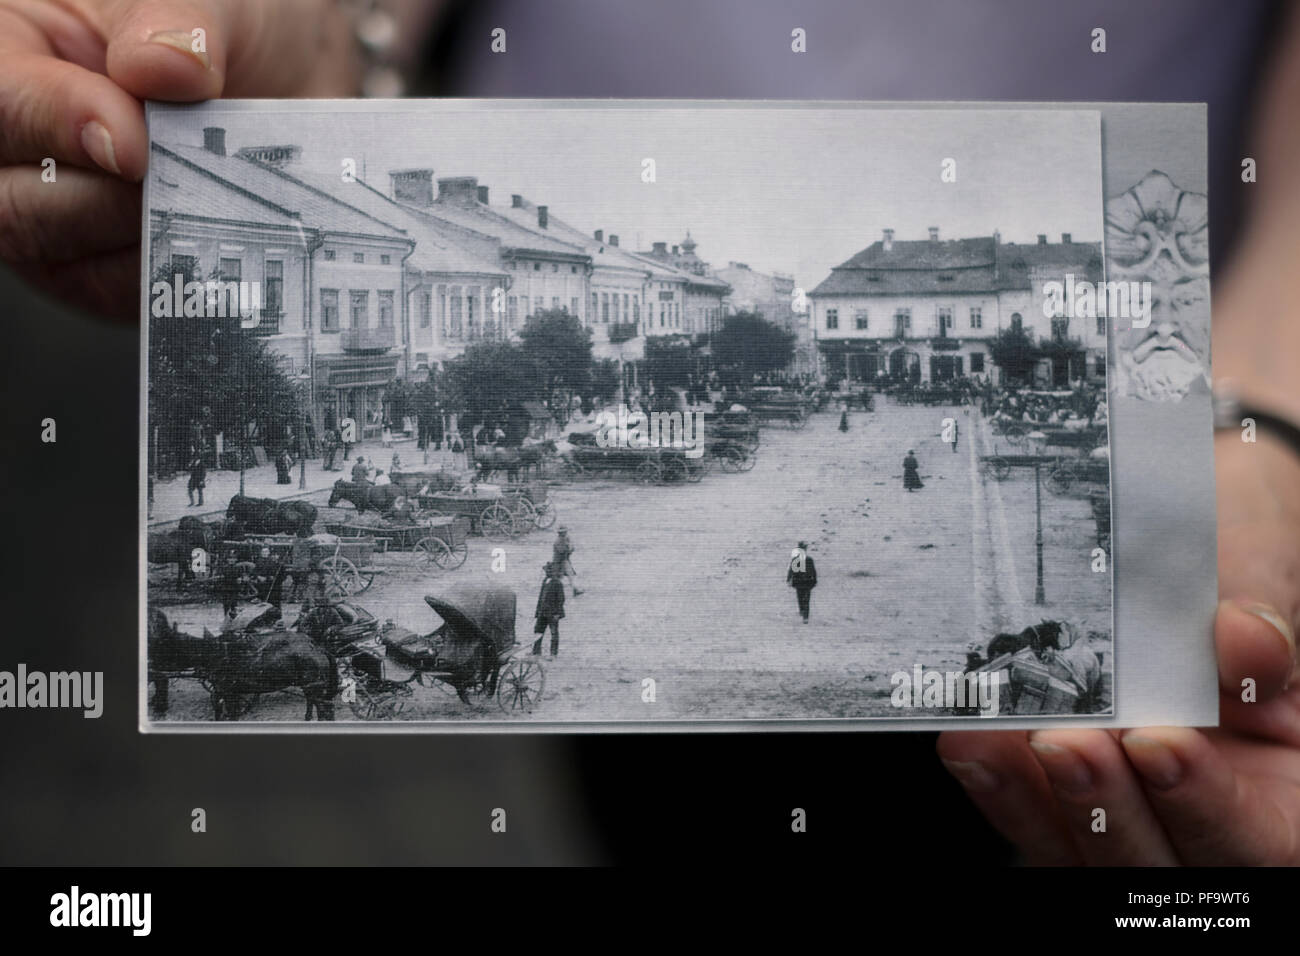 A person holds old photographs of the city of Drohobych in Lviv Oblast, Ukraine which was once home to a large Jewish community and was annihilated by the Germans during the Second World War Stock Photo